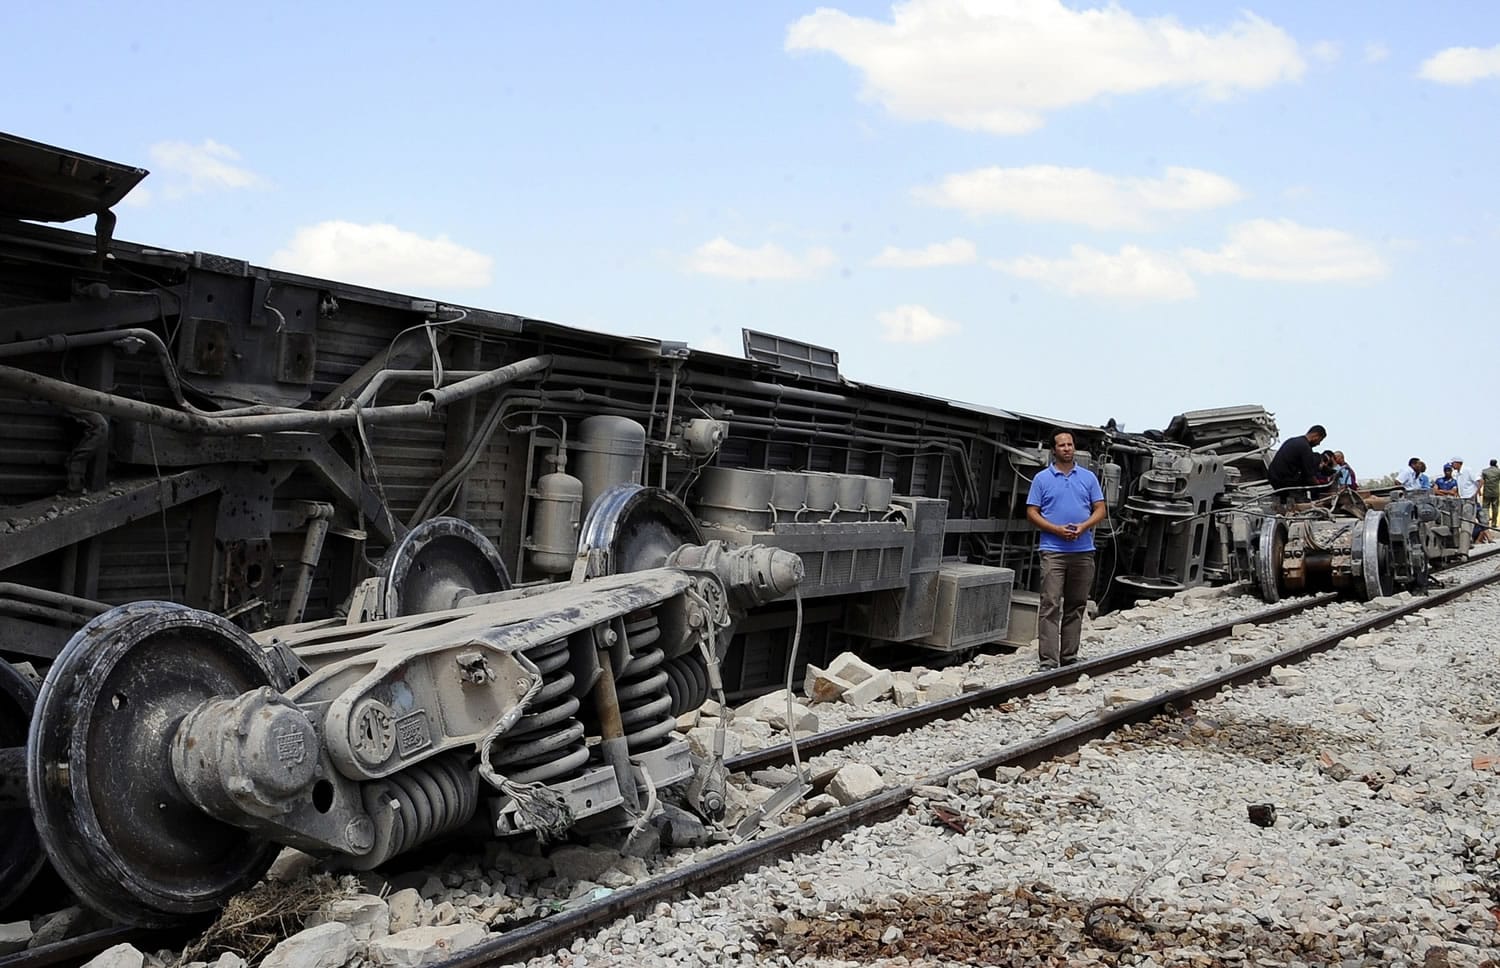 A man stands by a derailed carriage of a train outside Fahs, 37 miles from Tunis, Tunisia, on Tuesday.